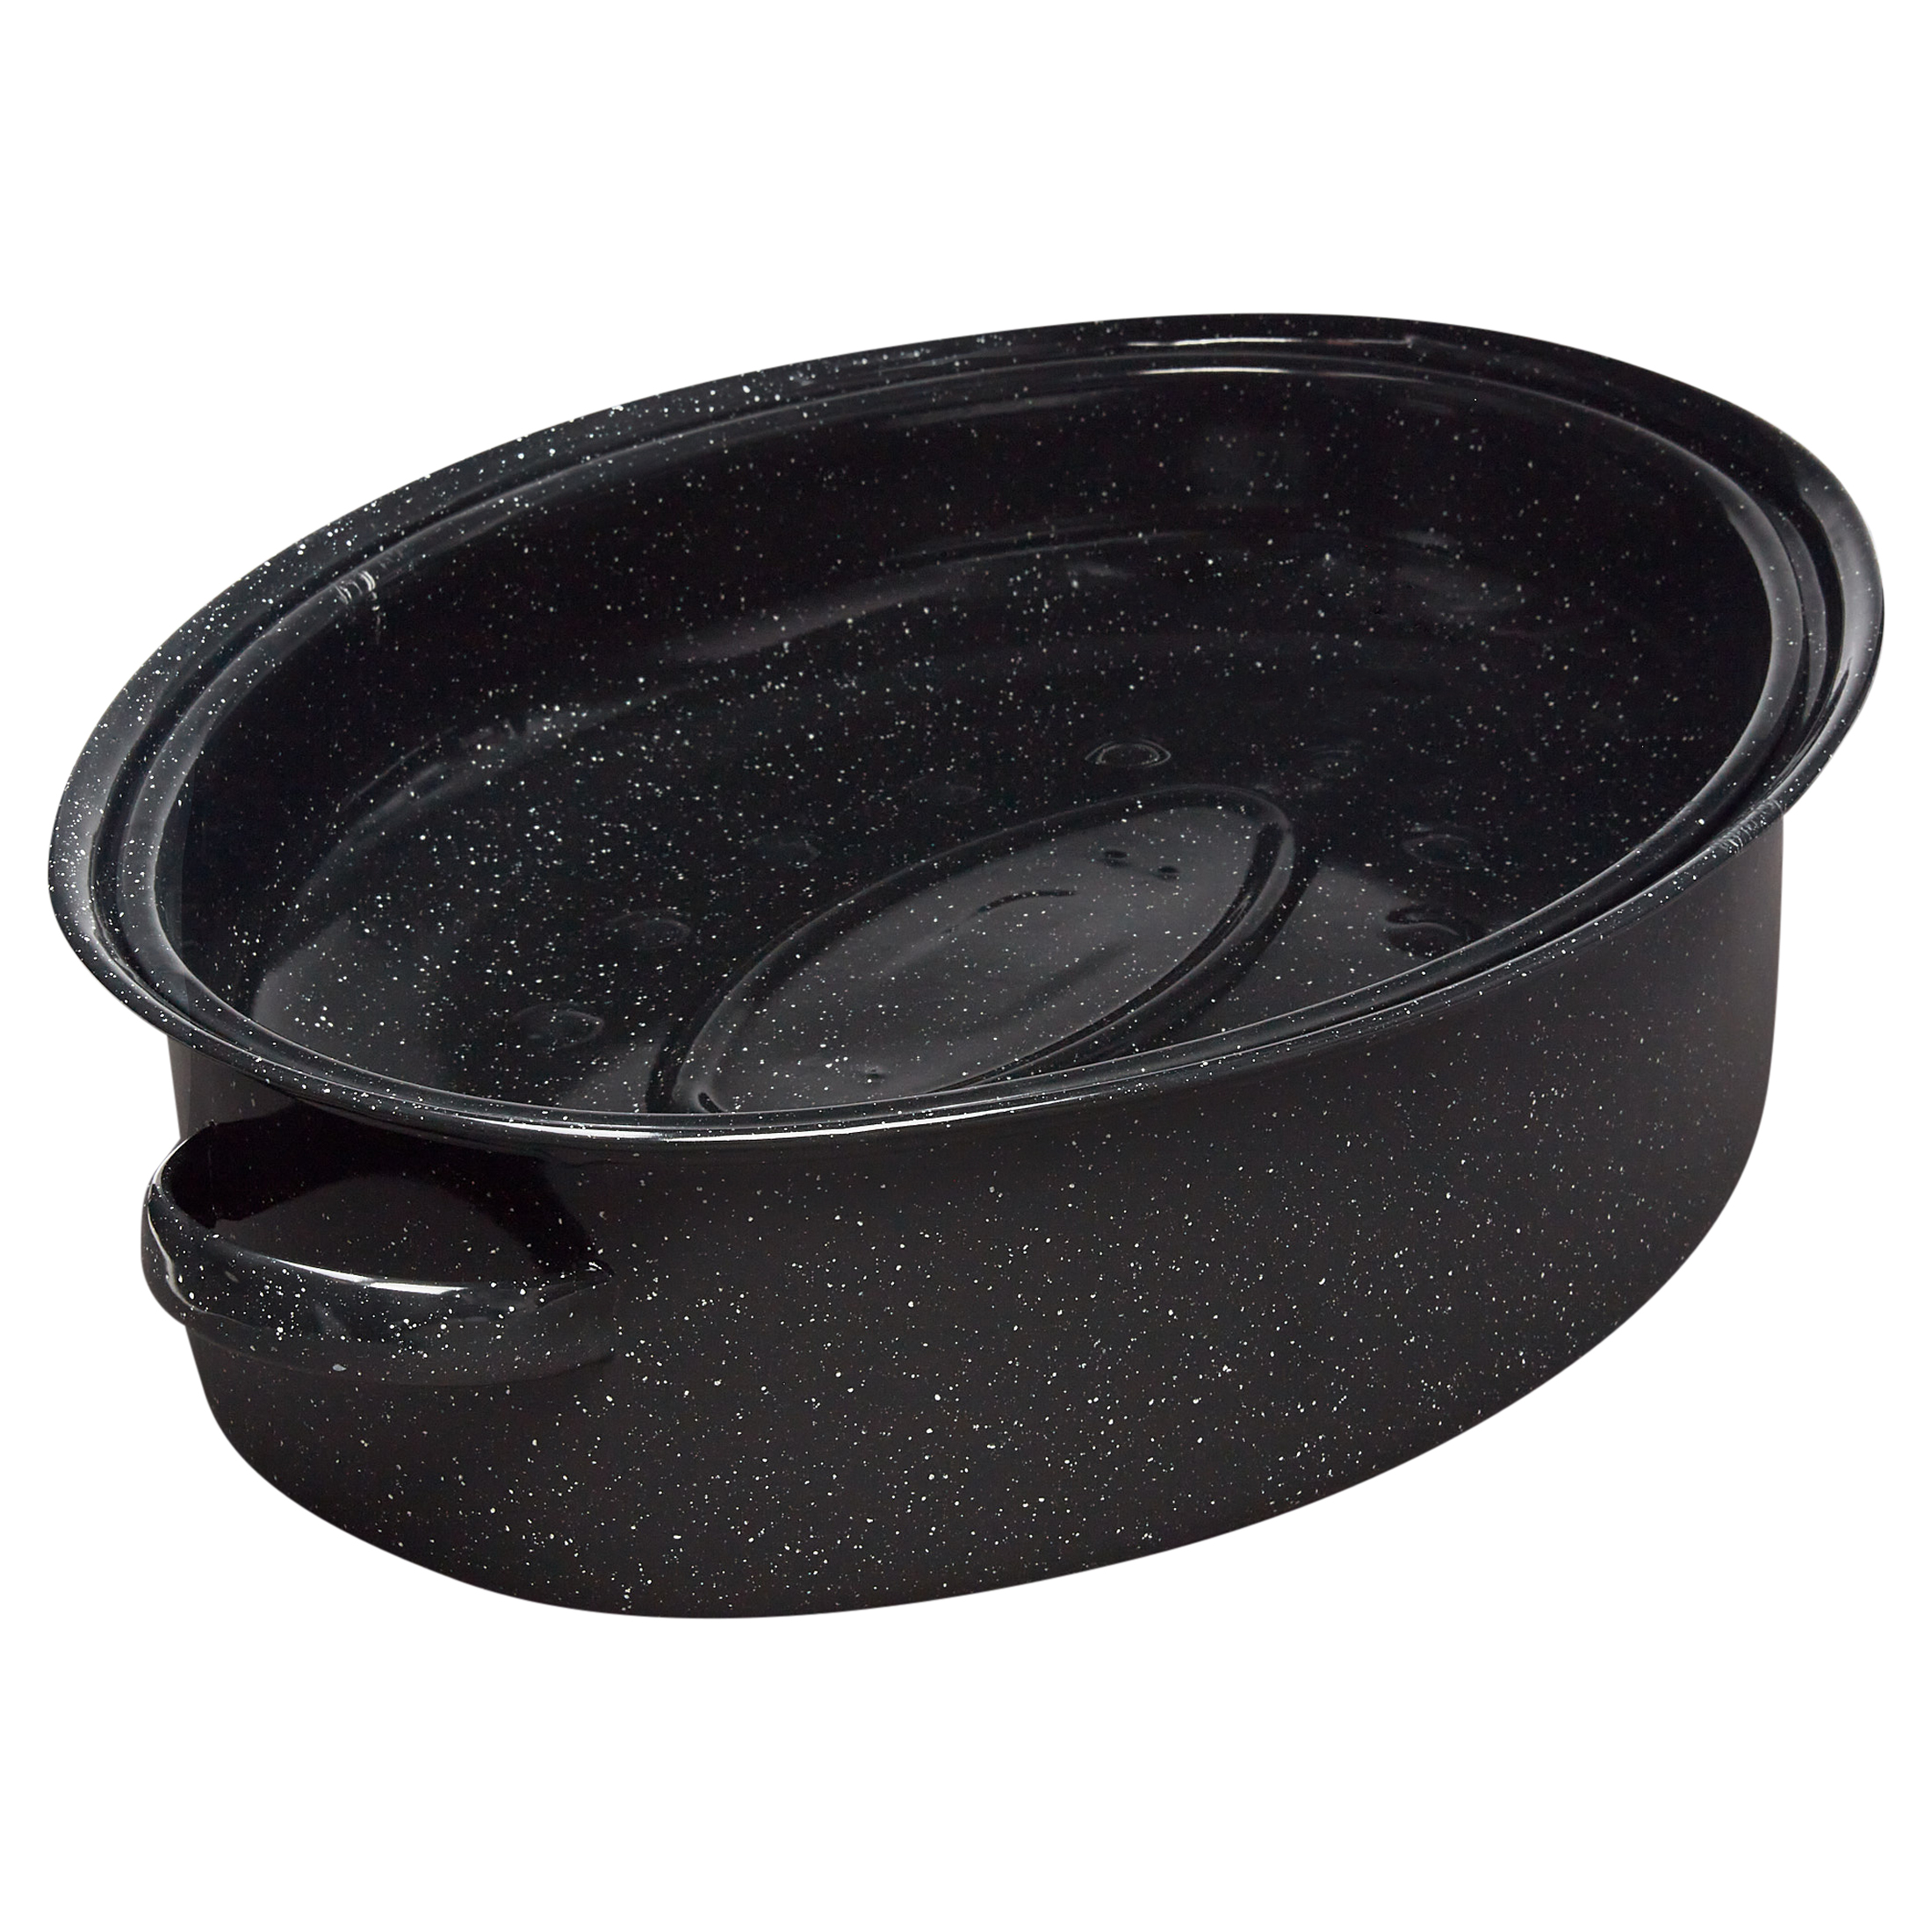 Granite Ware 18" Covered Oval Roaster, 15 Pound Capacity, Roasting Pan - image 3 of 5